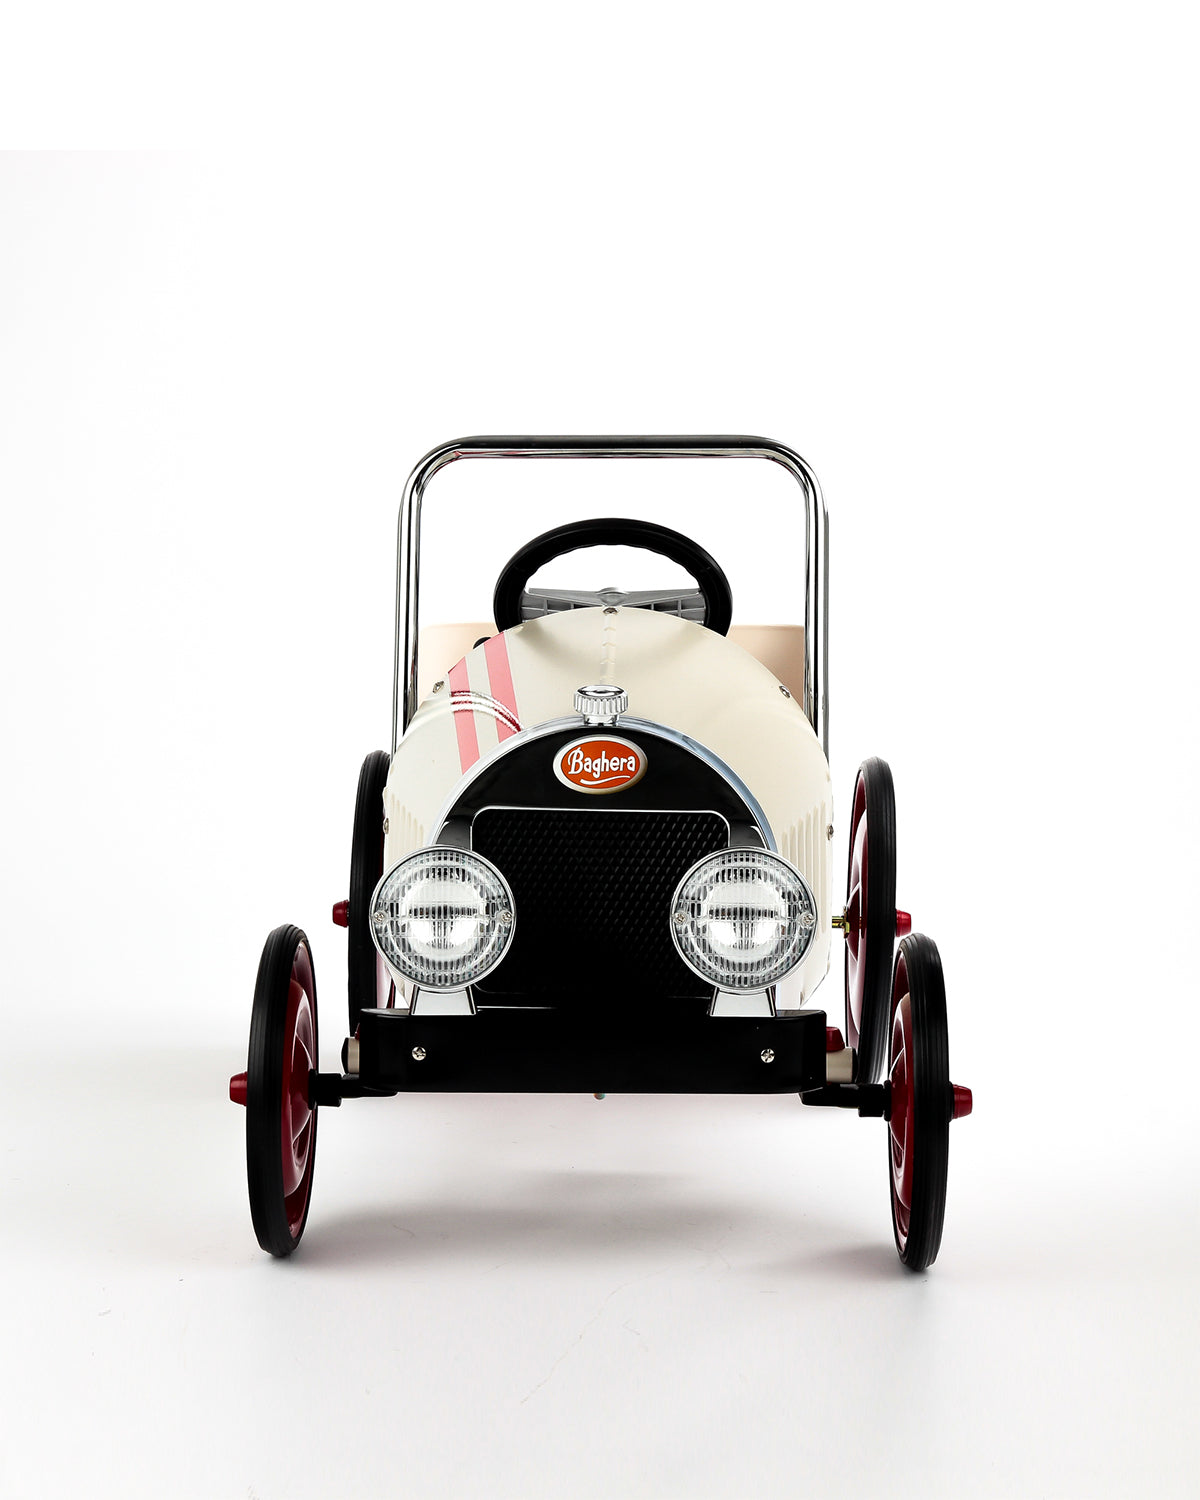 Ride-On CLASSIC PEDAL CAR